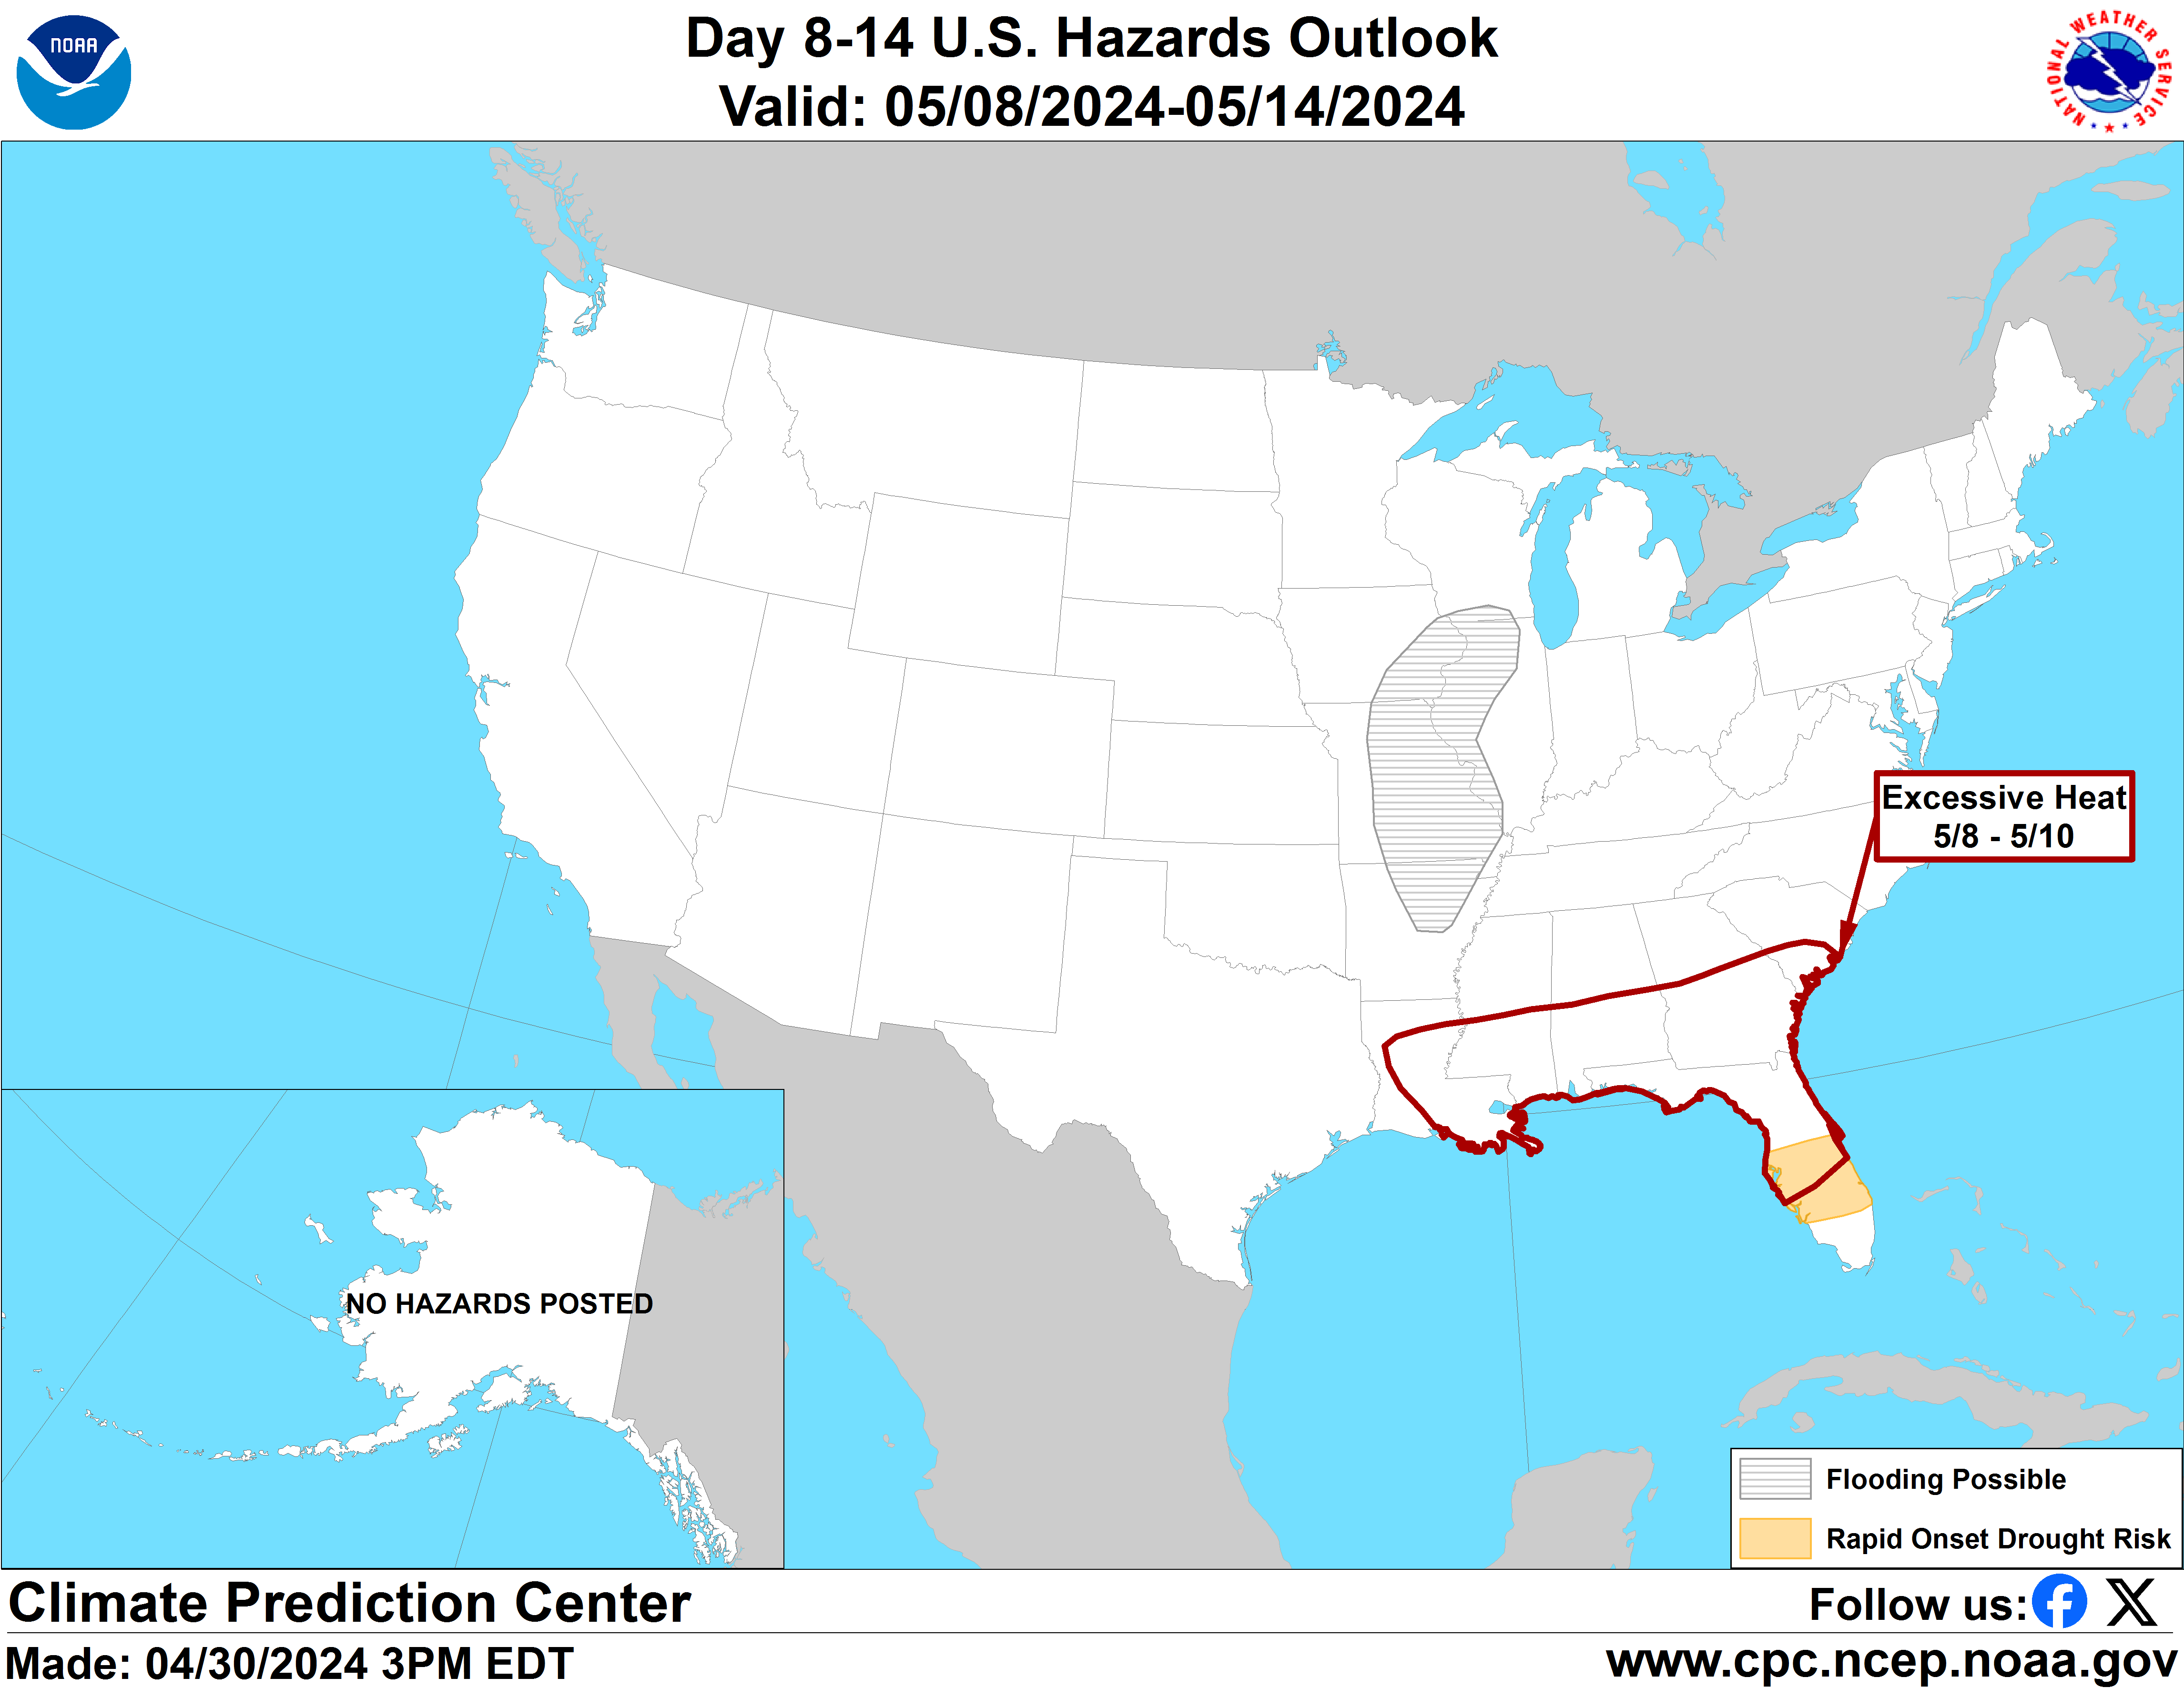 https://www.cpc.ncep.noaa.gov/products/predictions/threats/hazards_d8_14_contours.png